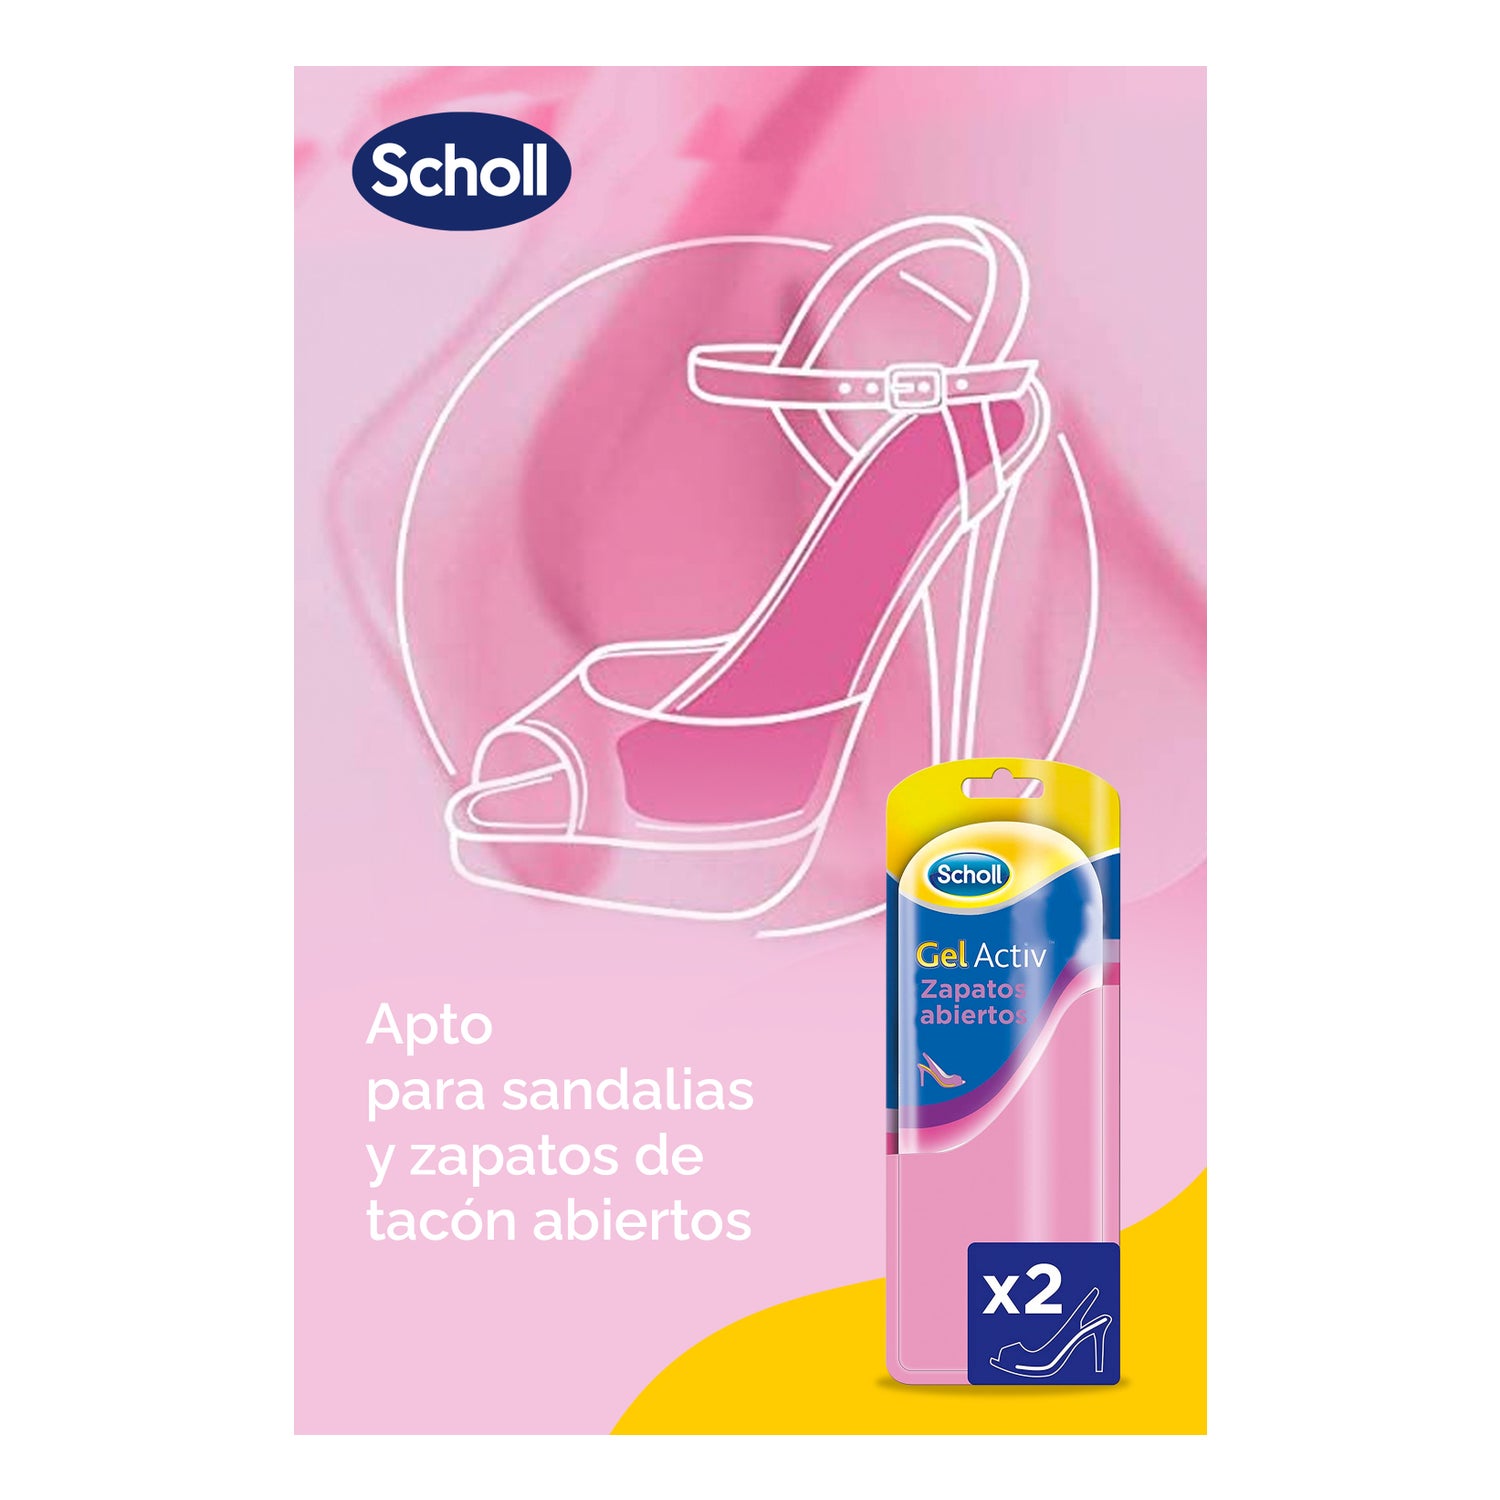 Scholl Gel Activ Open Shoes Insoles - YouTube